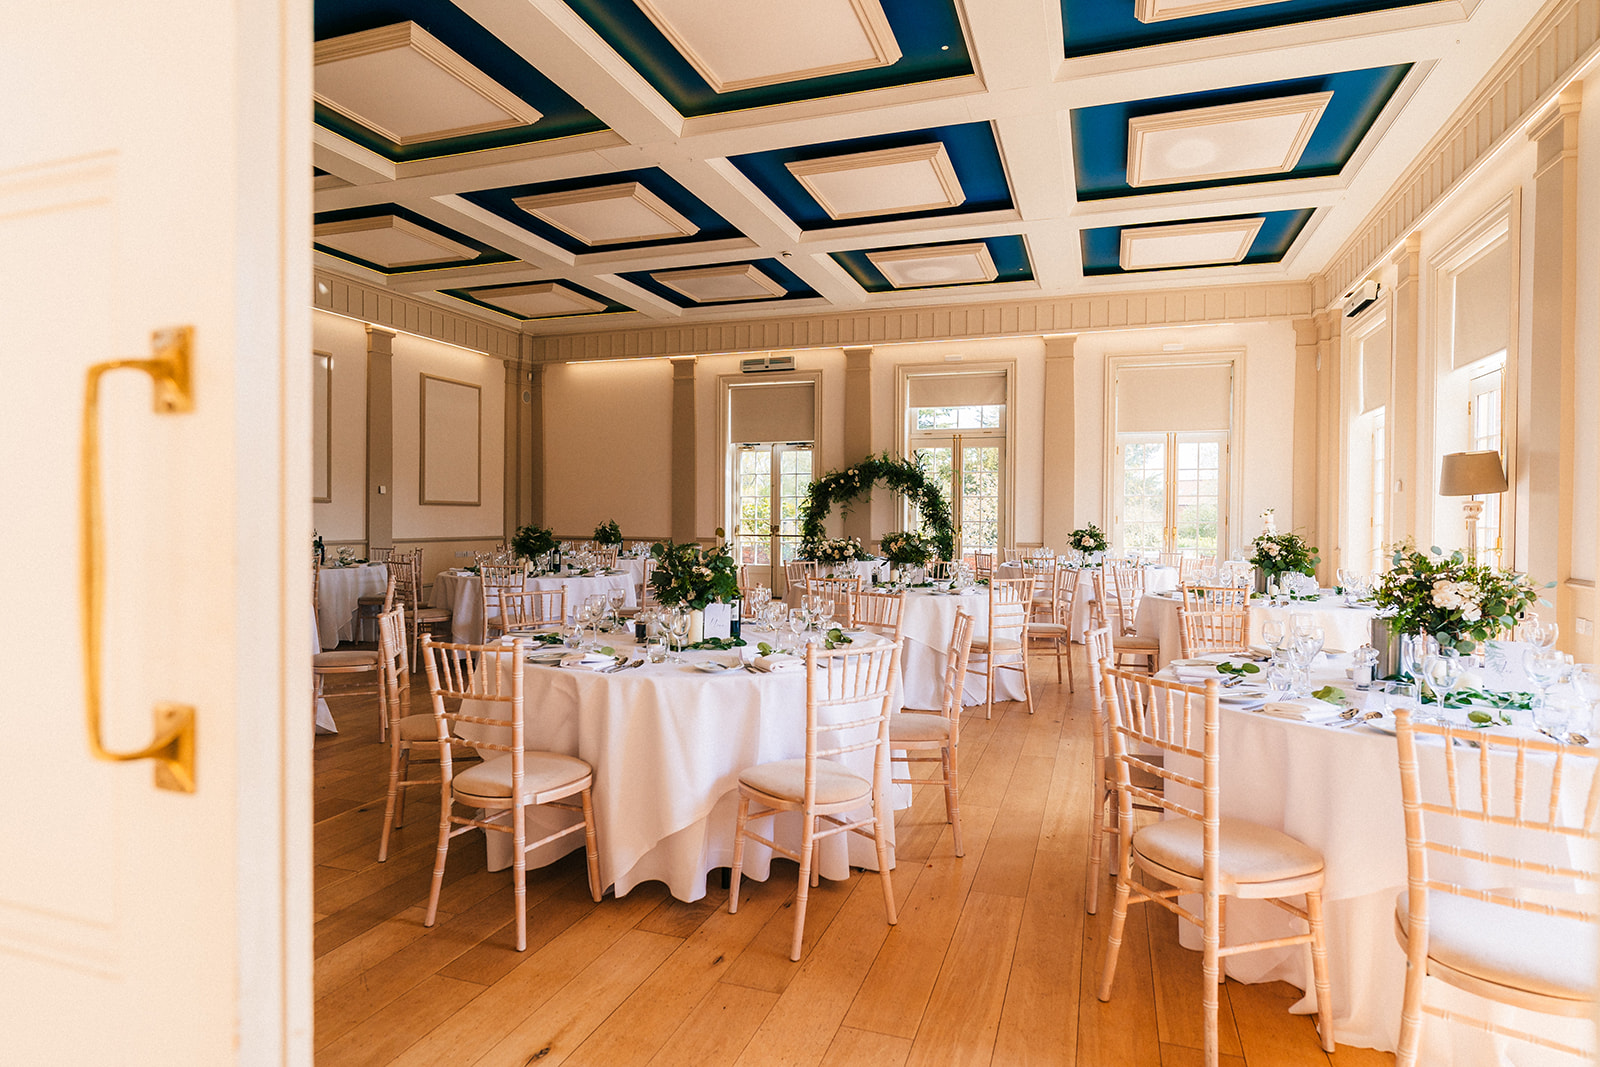 The wedding breakfast room at Hodsock Priory